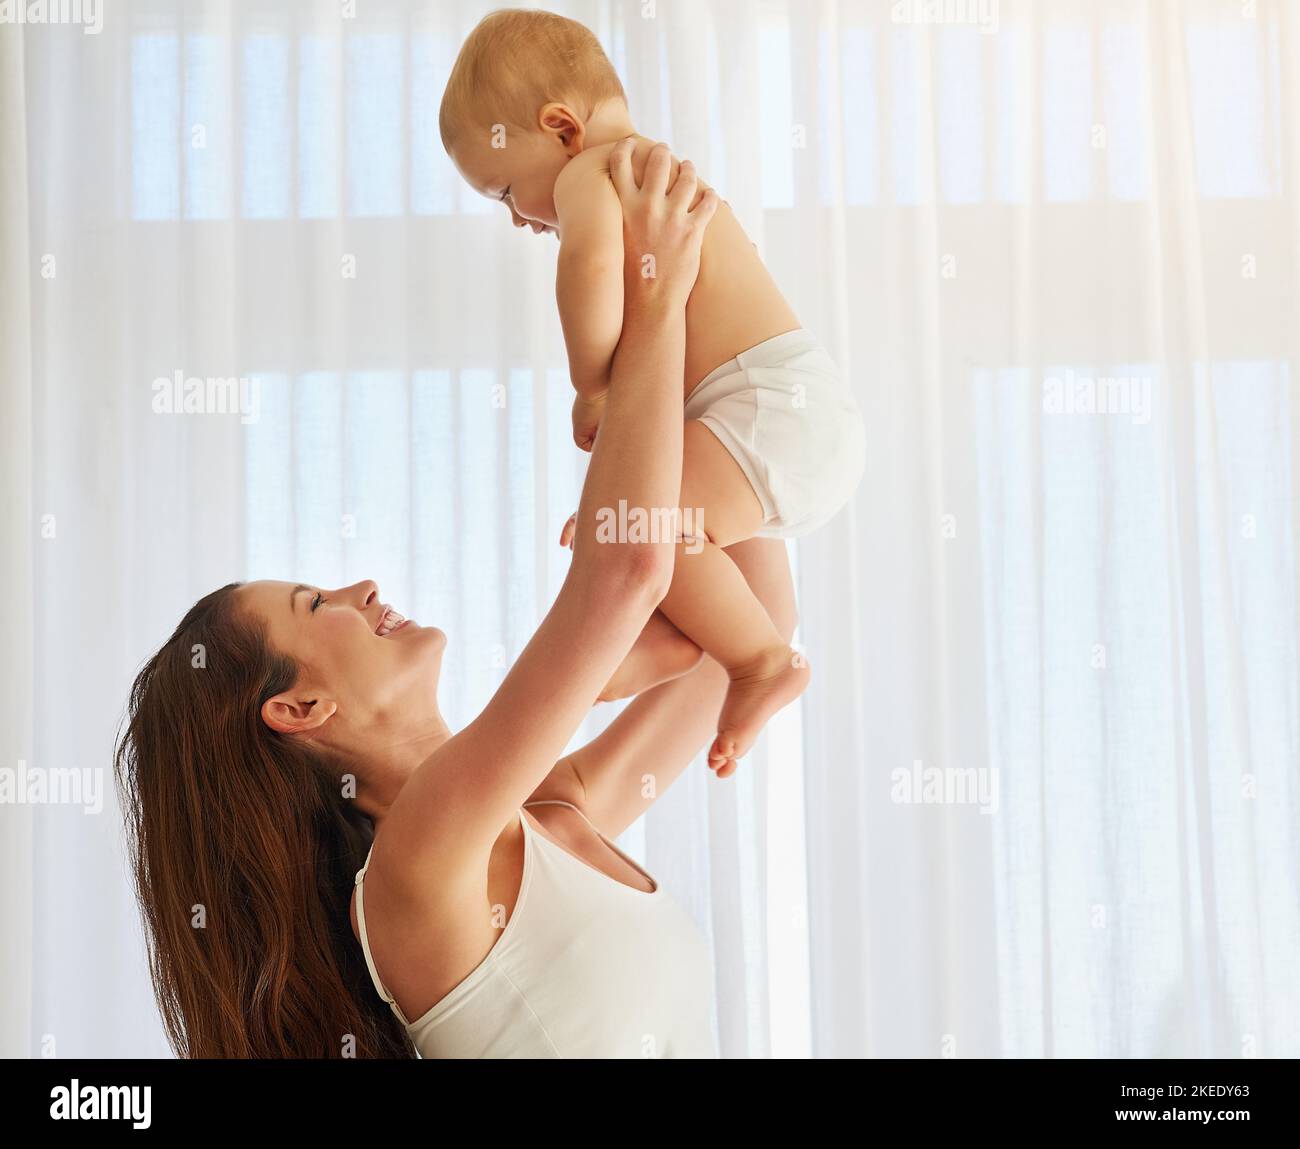 Theyre in high spirits. a mother spending quality time with her baby boy at home. Stock Photo